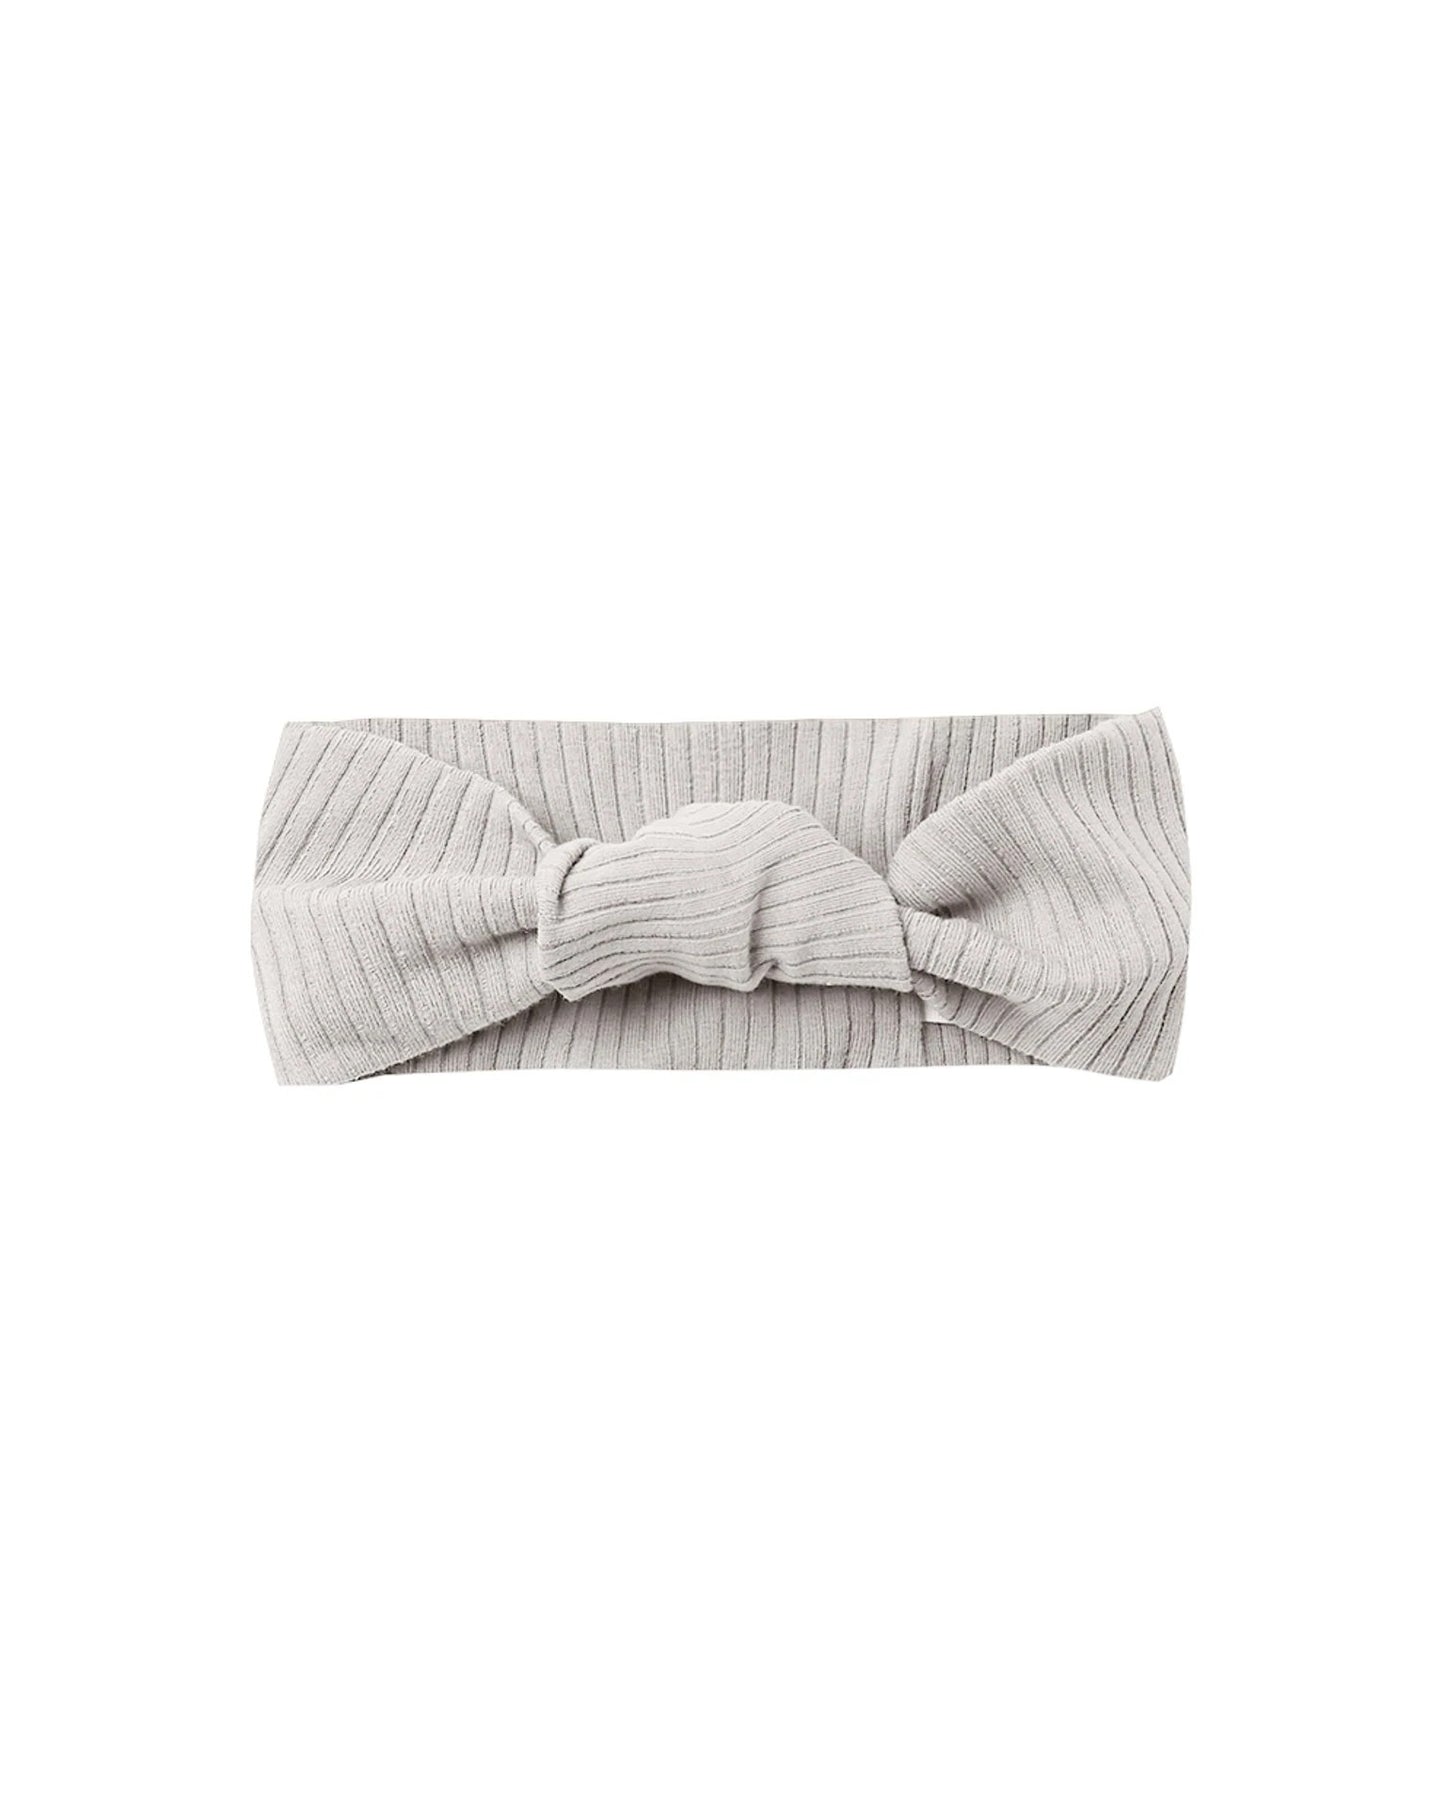 SALE - Quincy Mae Ribbed Baby Knotted Headband Turban - Multiple Colors Available